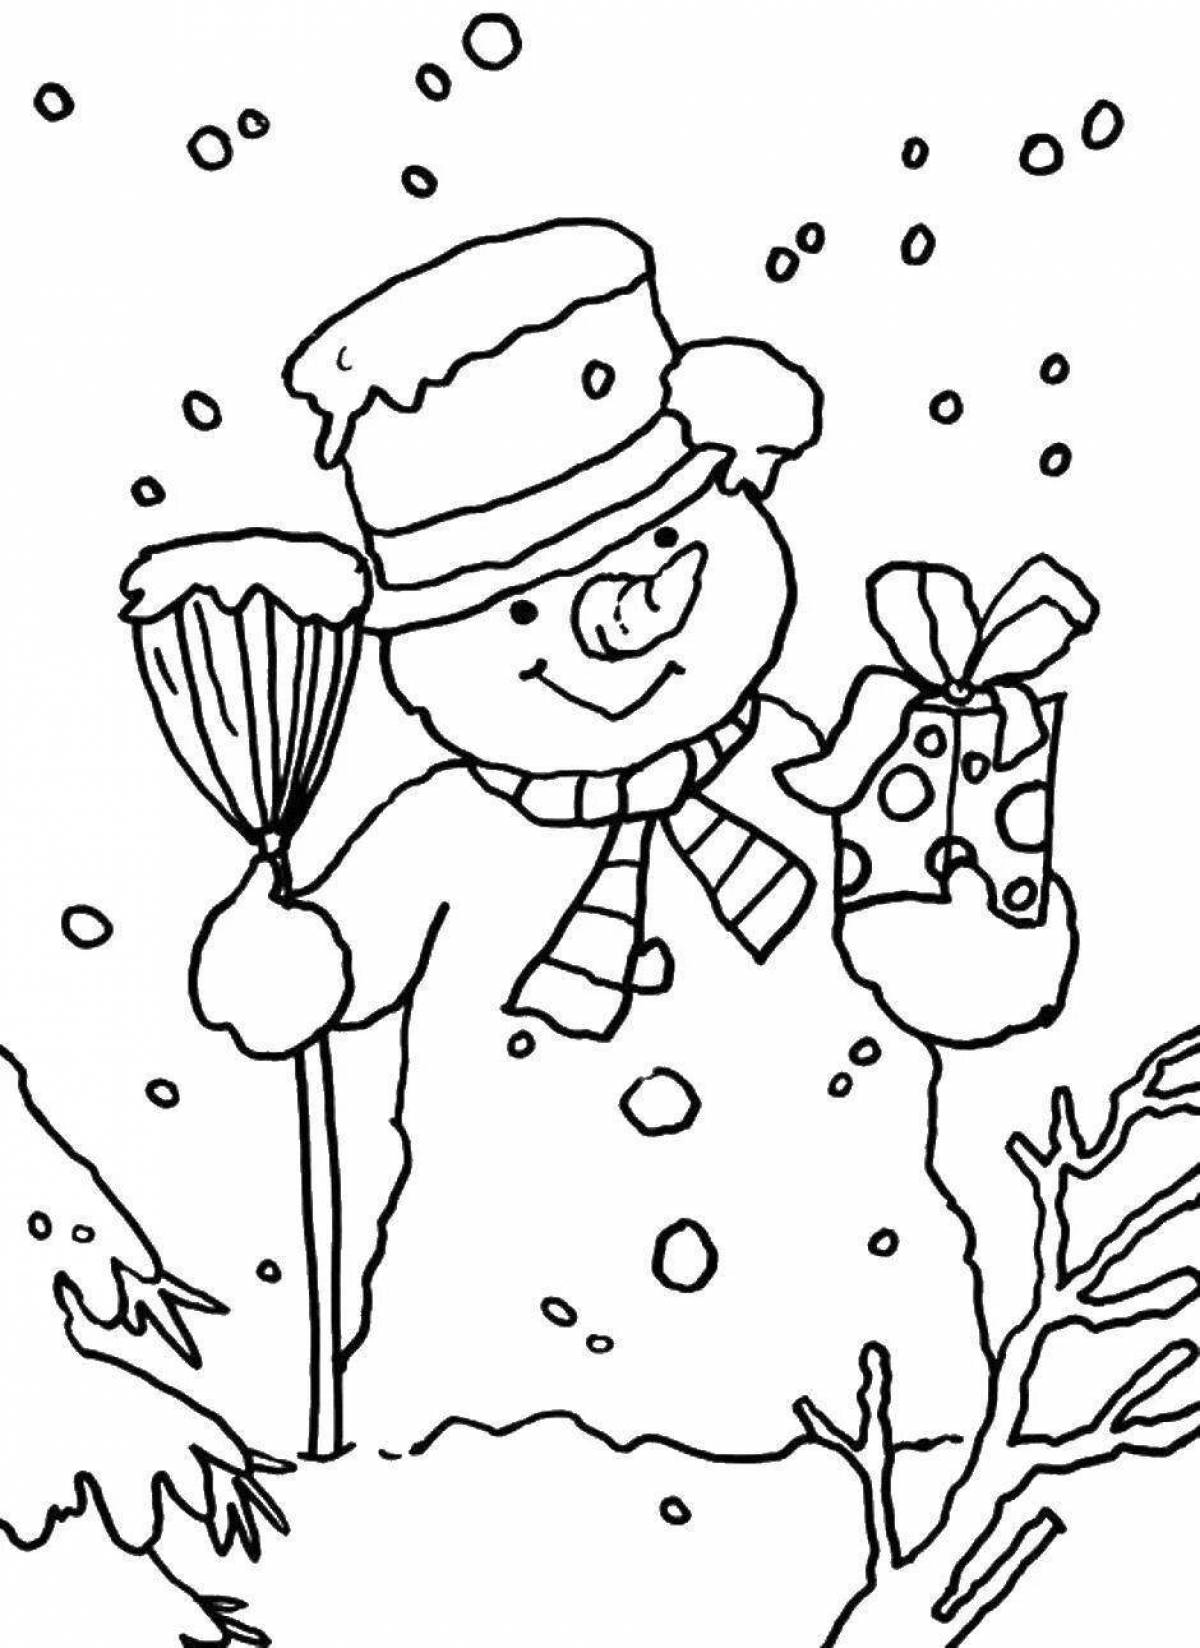 Creative snow coloring book for kids